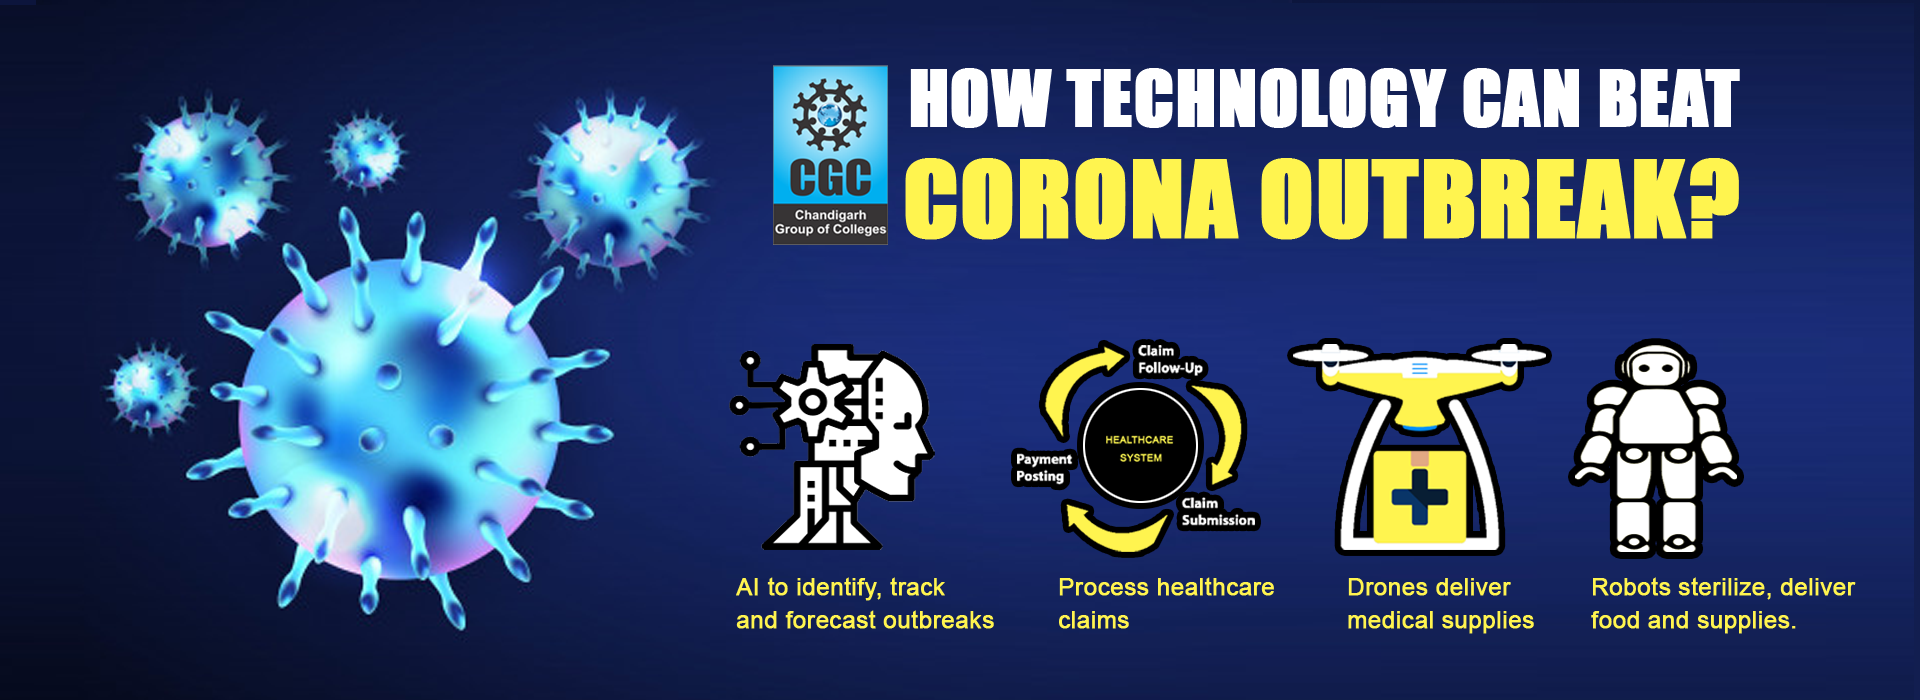 HOW TECHNOLOGY CAN BEAT CORONA OUTBREAK? 